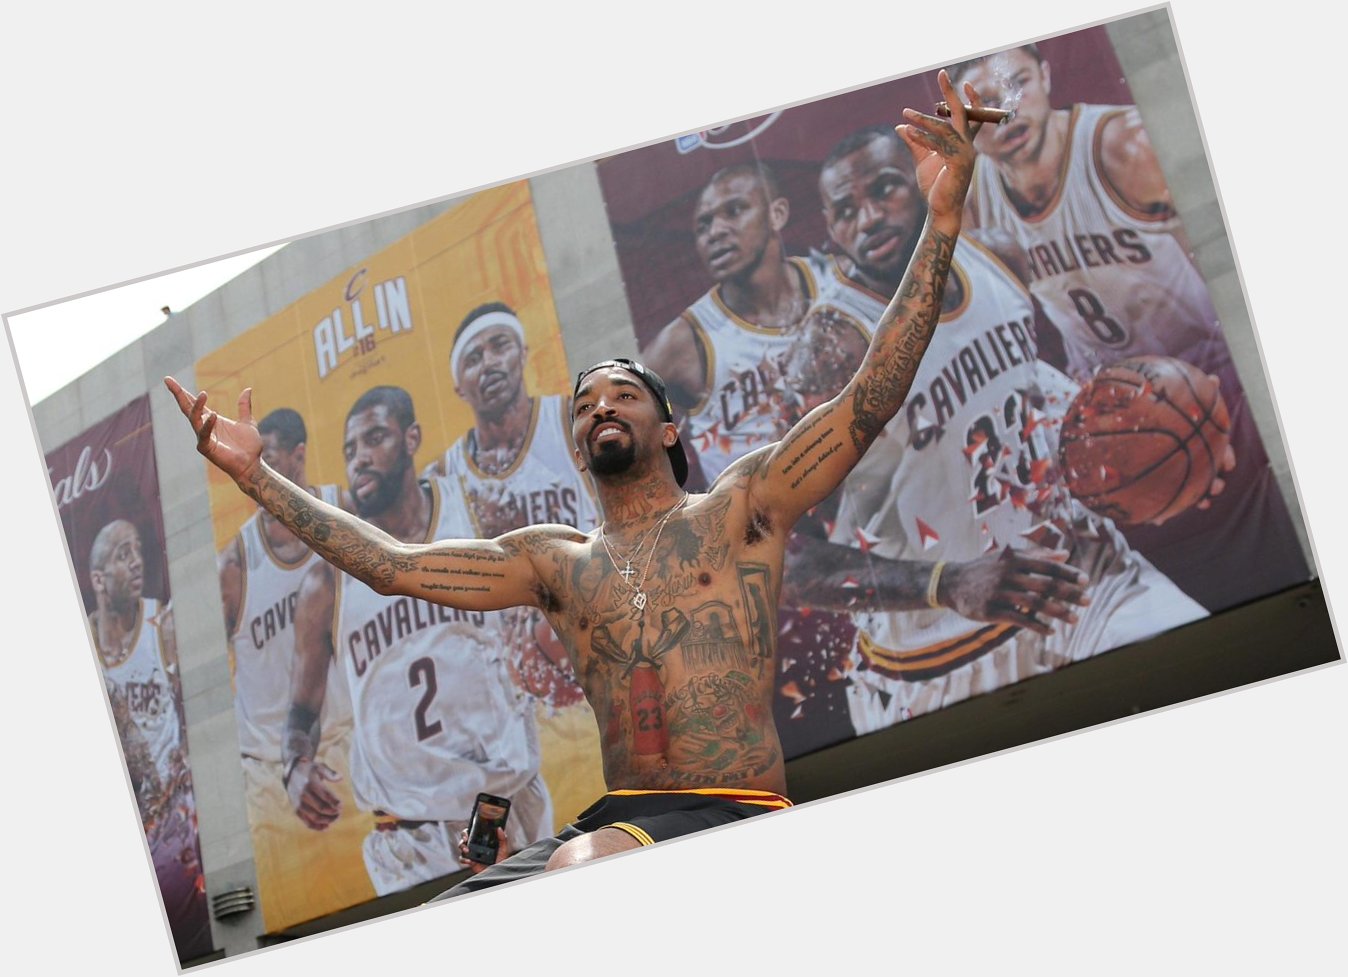 Happy 35th birthday to the one and only J.R. Smith. 